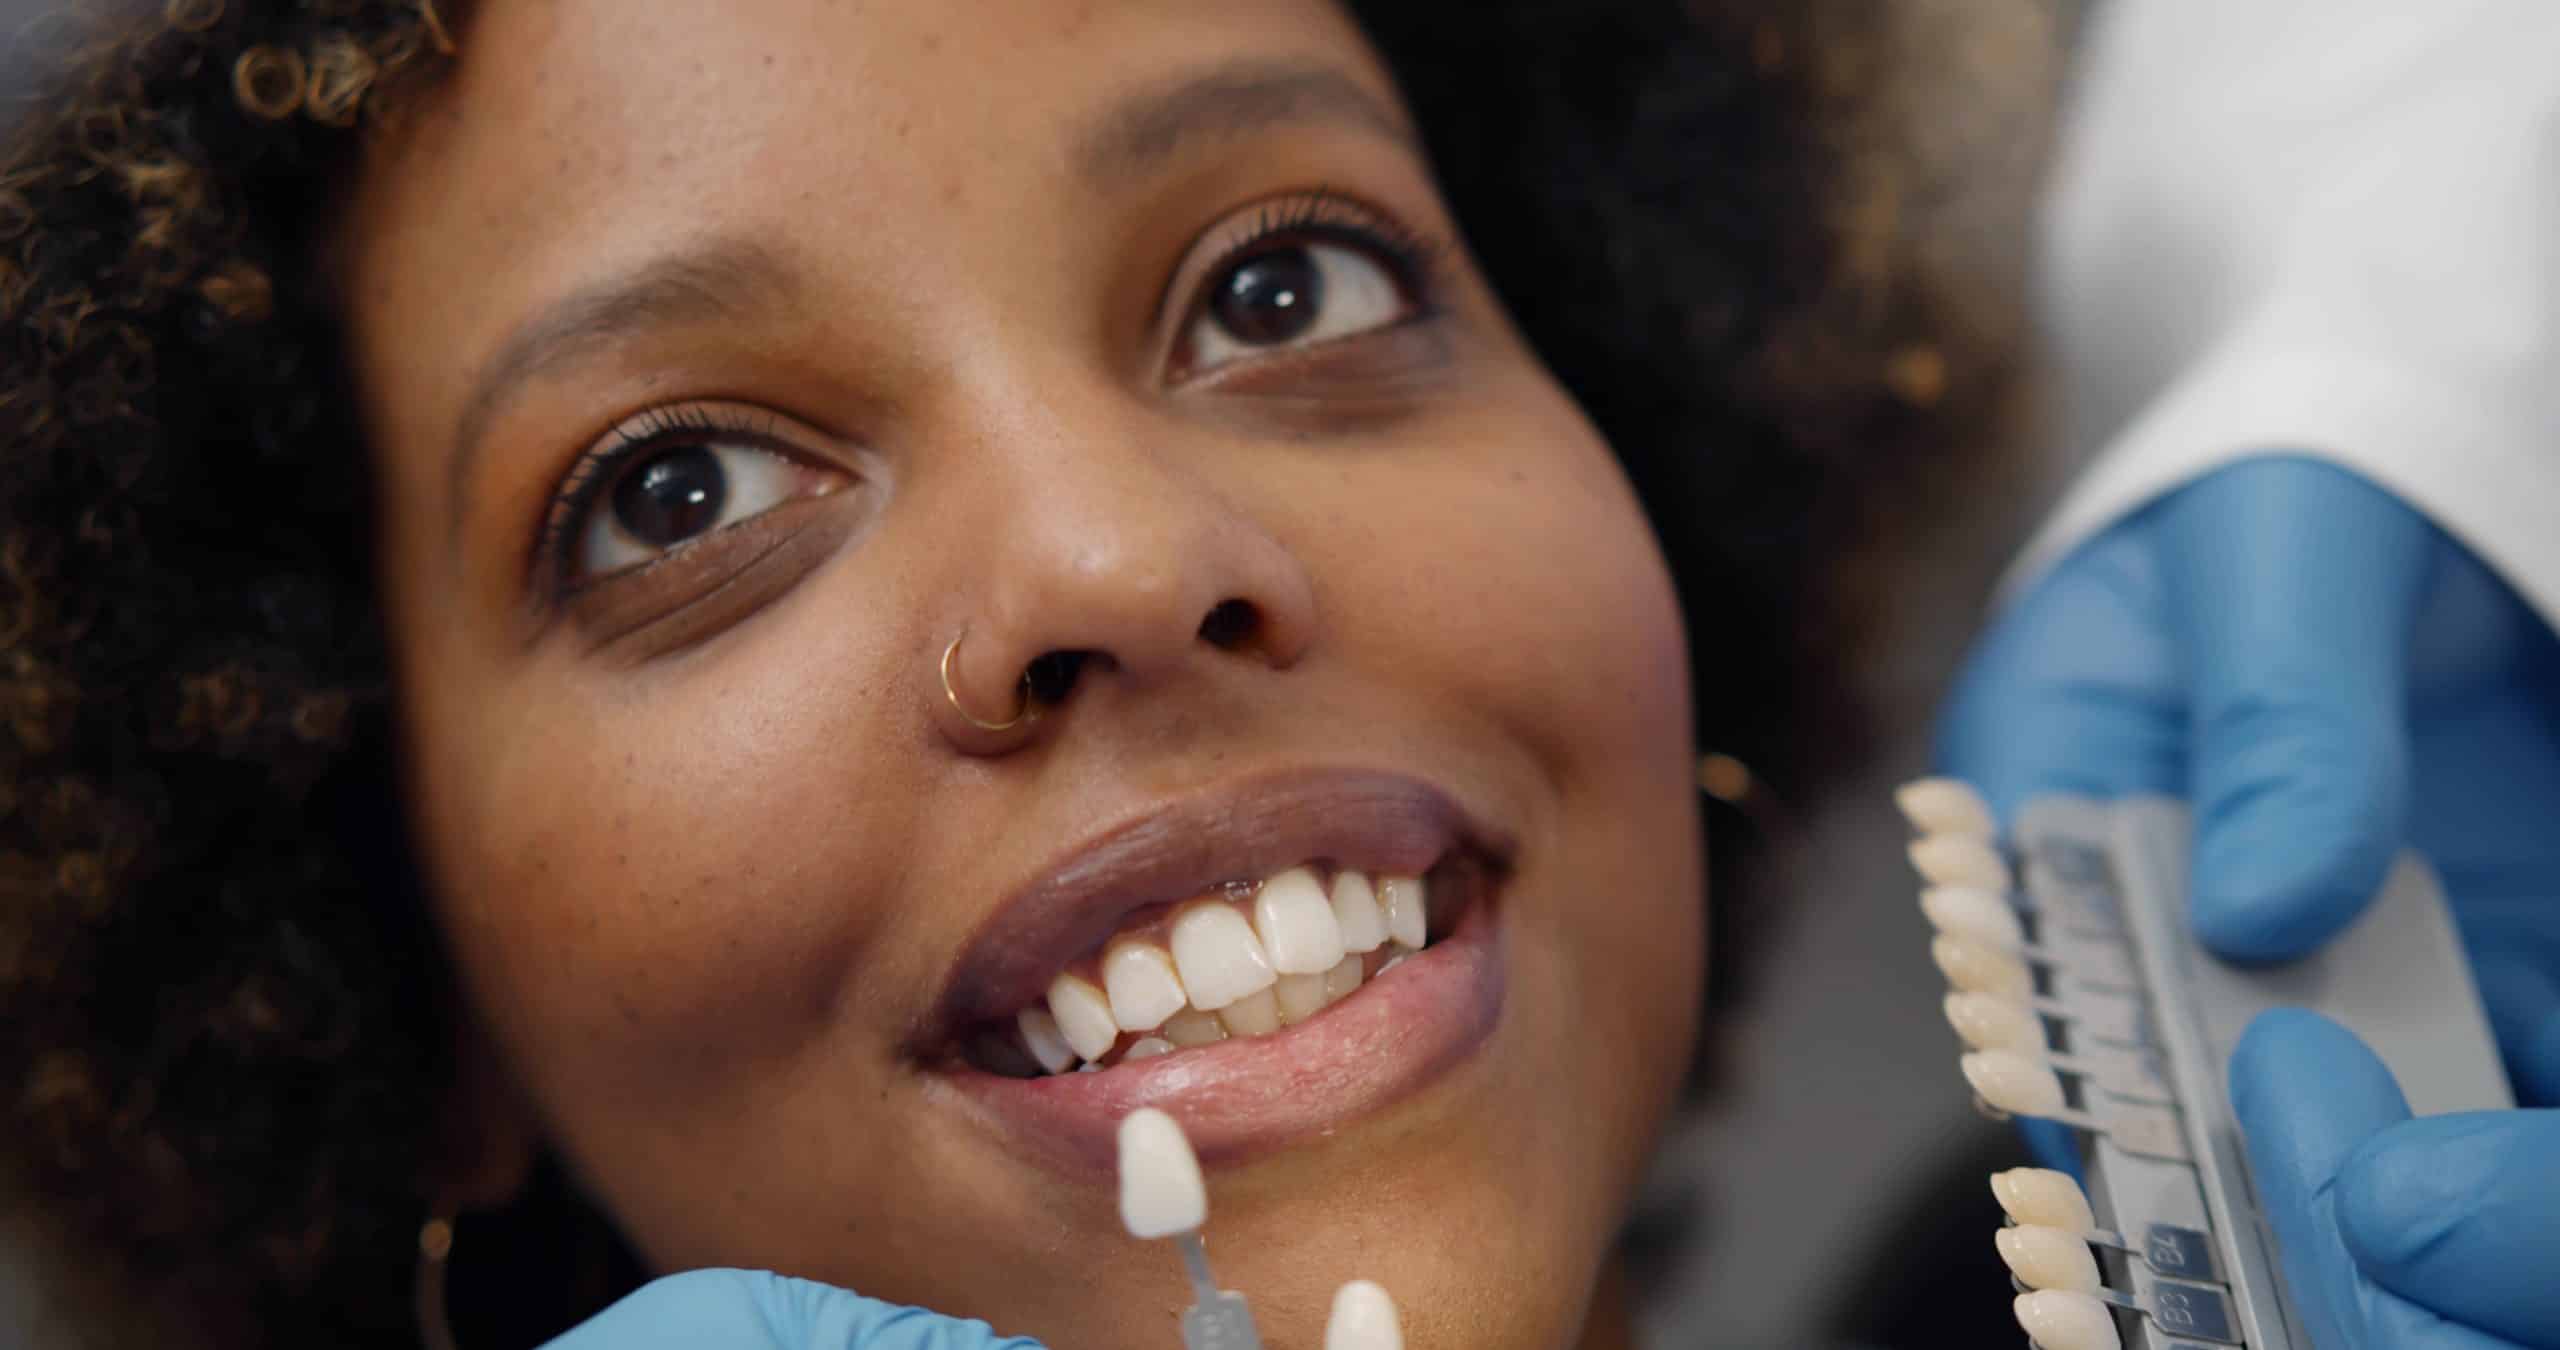 The cost of dental veneers: is it worth the investment?